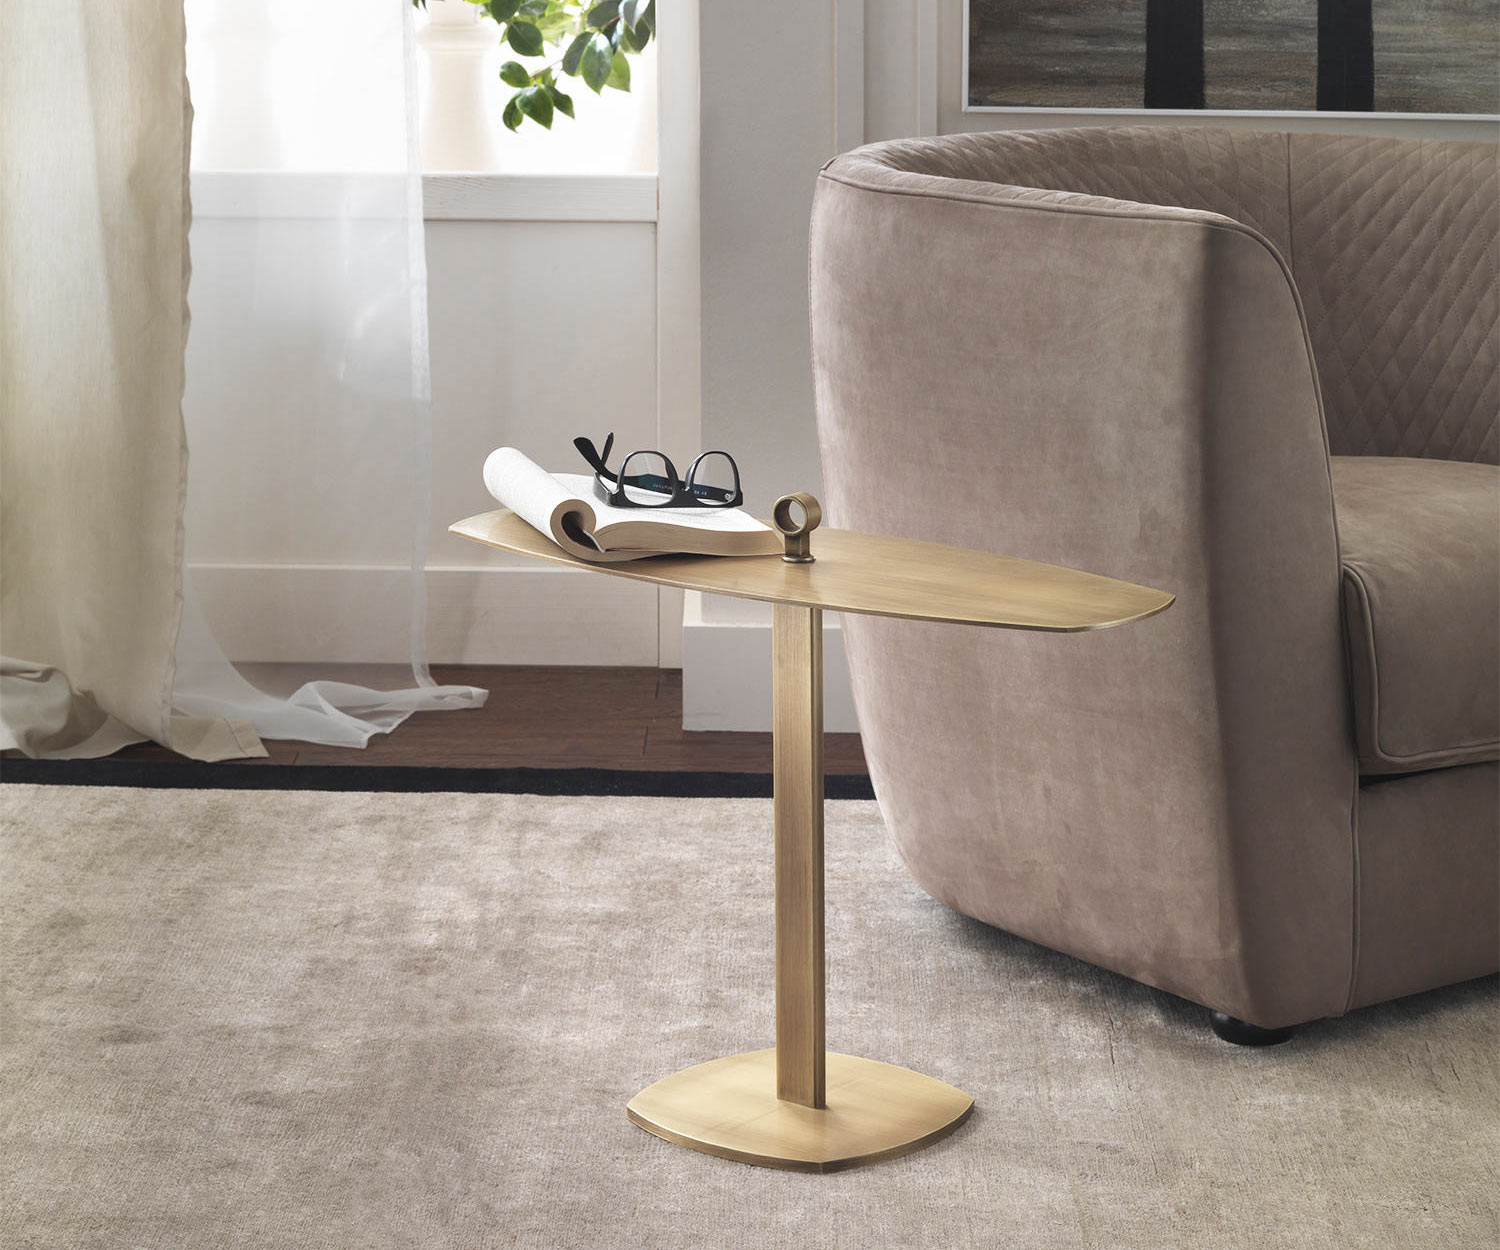 High-quality Marelli Leaf side table in brushed brass